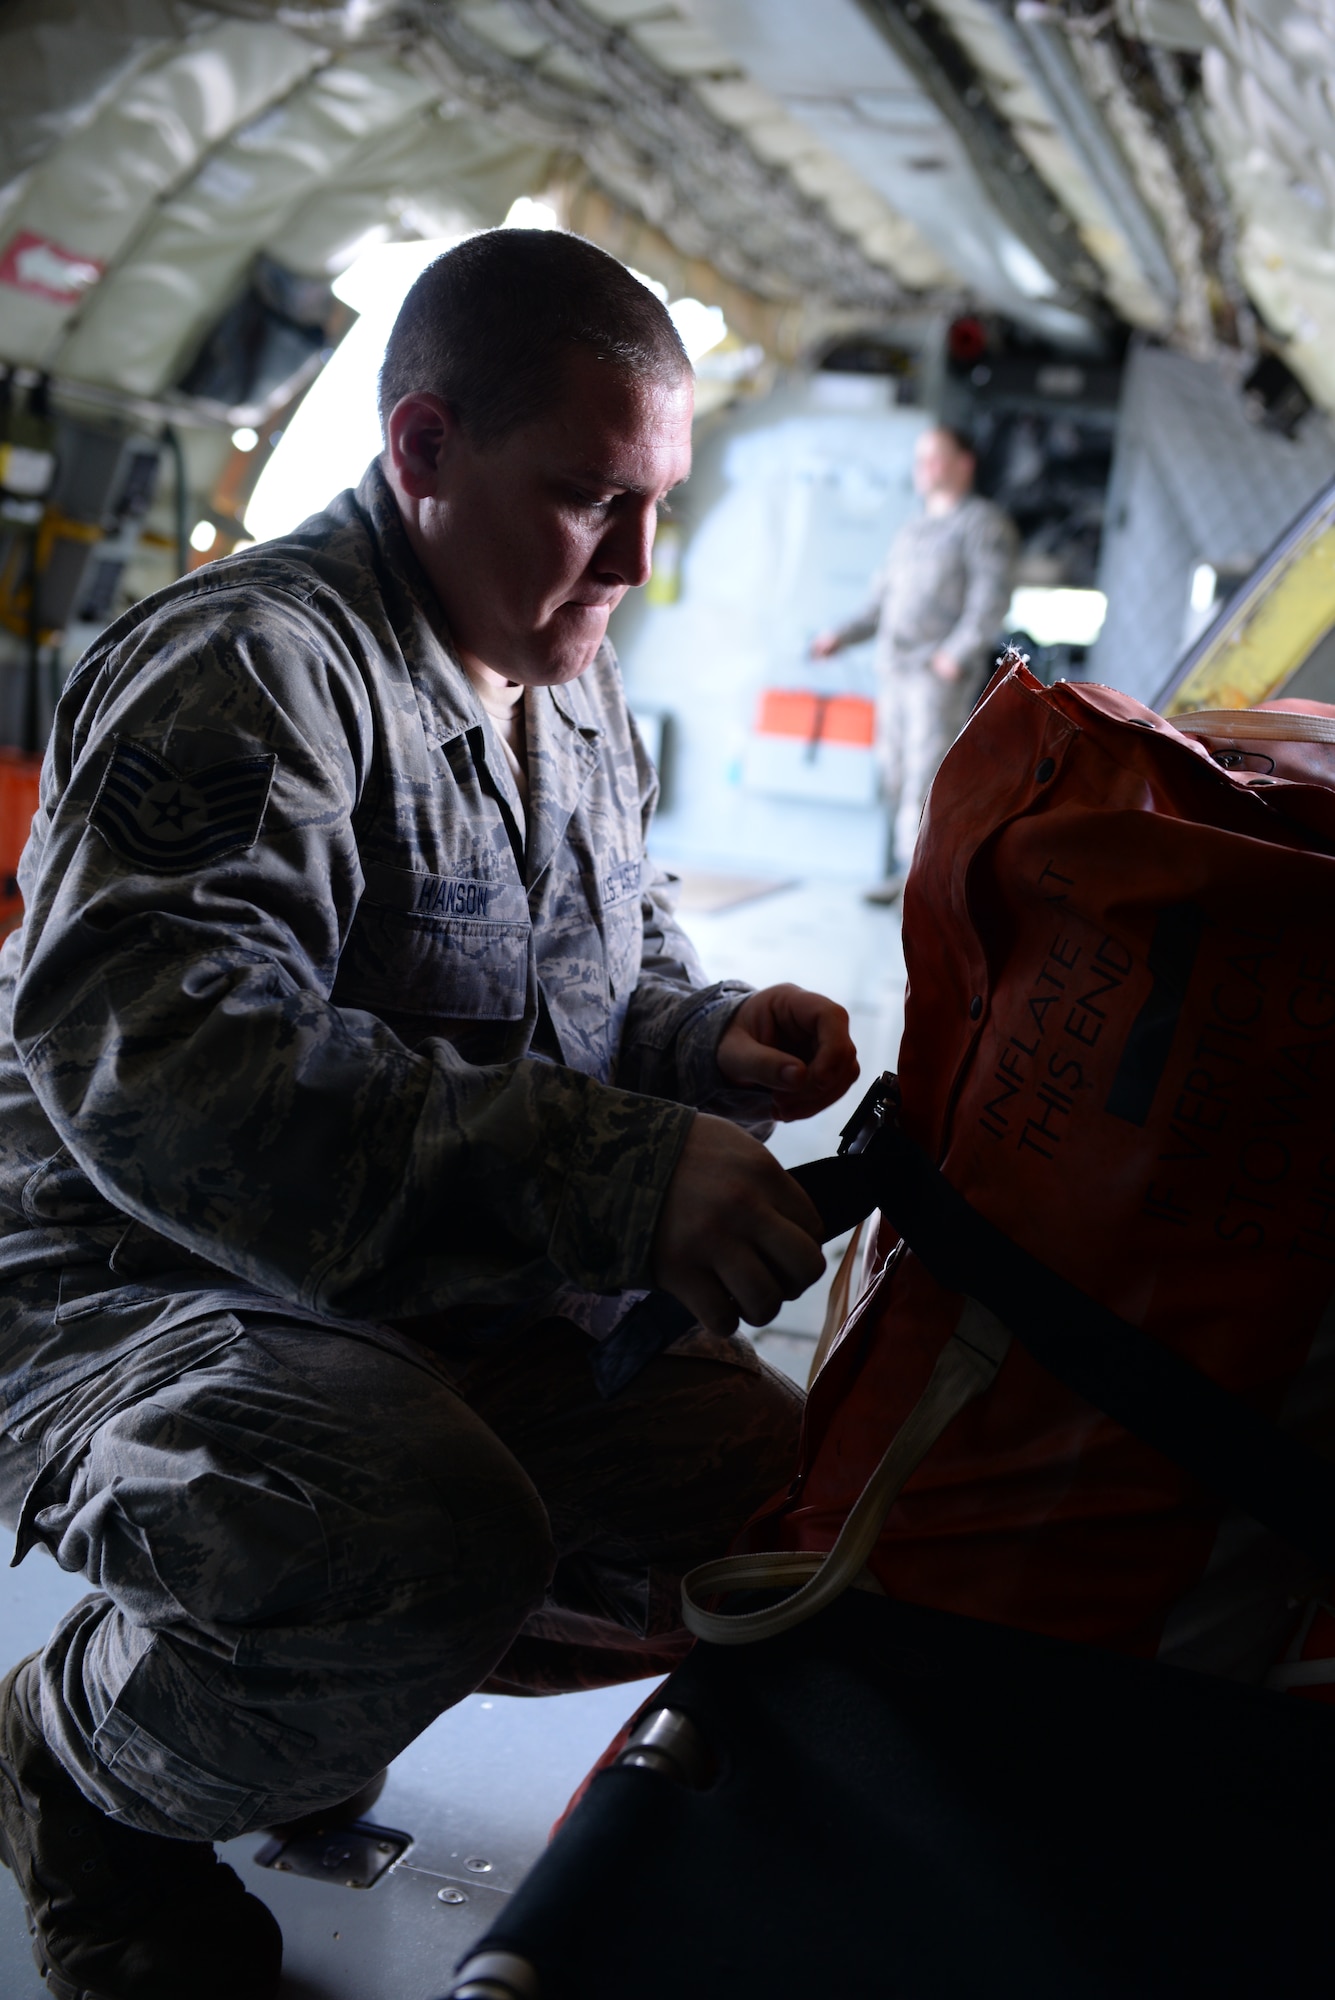 U.S. Air Force Tech. Sgt. Adam Hanson inspects and secures an emergency raft to ensure its stability during flight onboard a KC-135 Stratotanker Jan. 23, 2015. Hanson, along with the KC-135, is deployed to the 506th Expeditionary Air Refueling Squadron, Andersen AFB, Guam, as part of the Aircrew Flight Equipment team from the 157th Air Refueling Squadron, Pease ANG Base, N.H. (U.S. Air National Guard photo by Senior Airman Kayla McWalter/RELEASED)